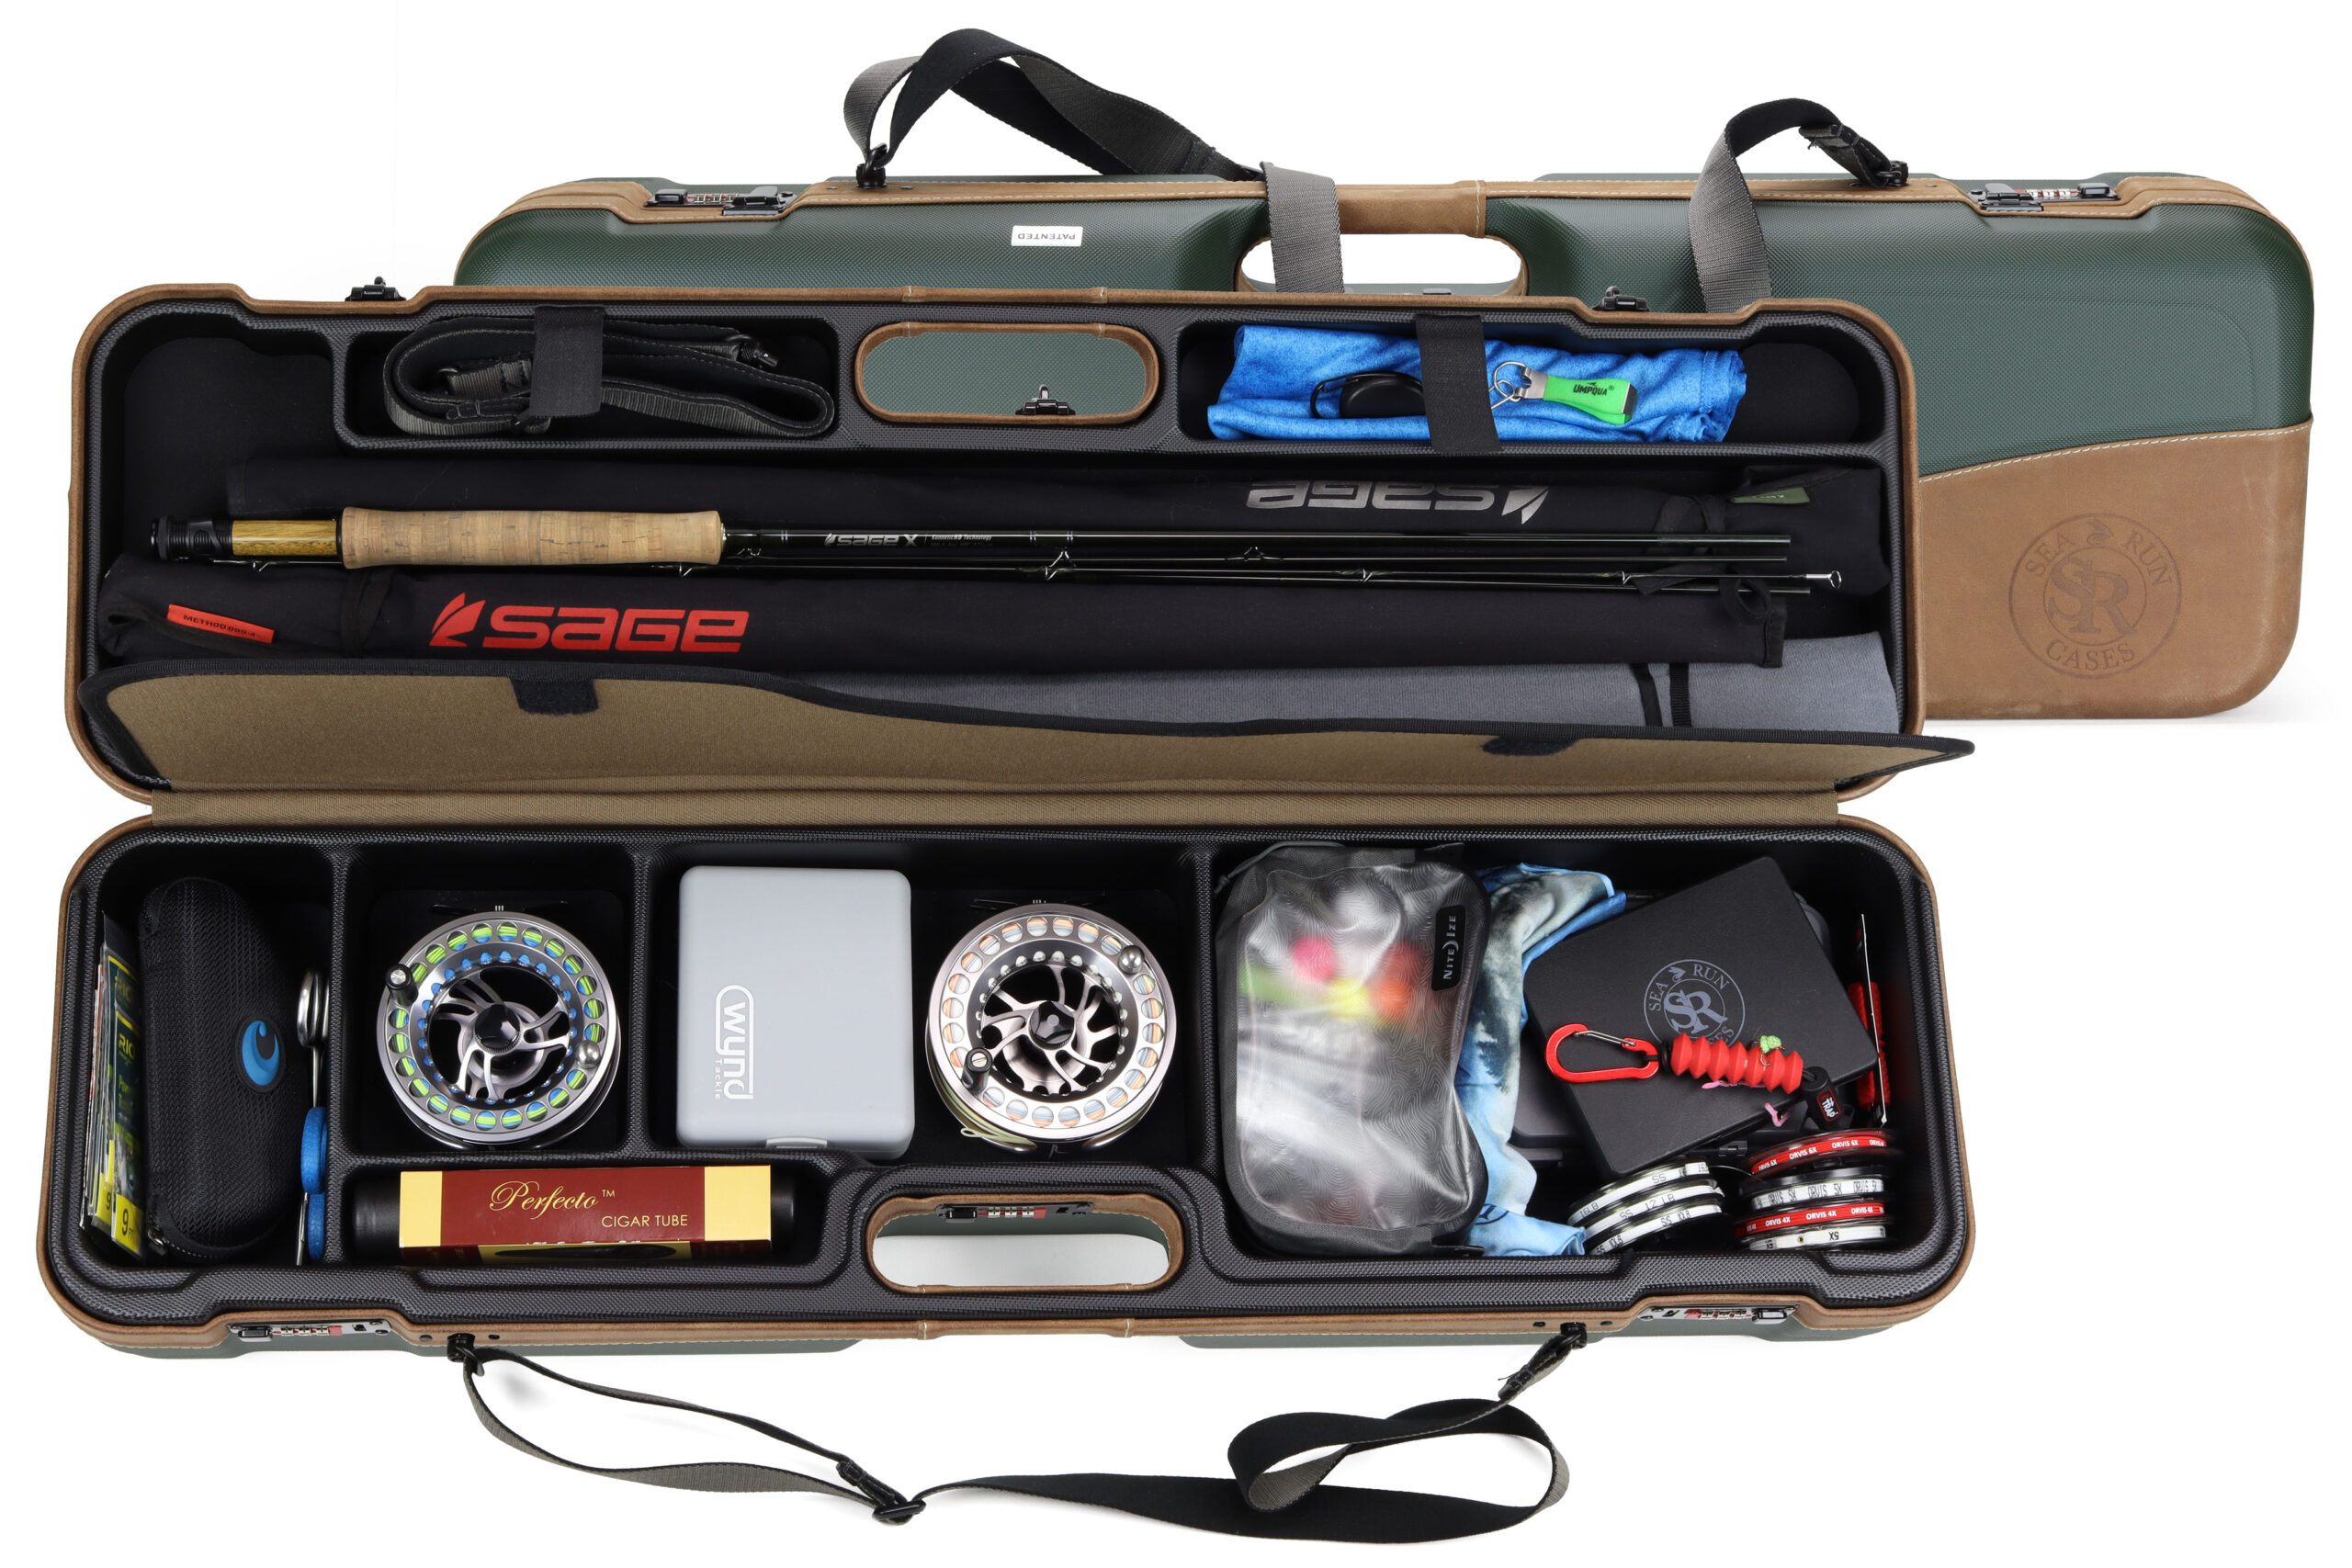 Norfork Classic QR Expedition Fly Fishing Rod and Reel Travel Case - 9' 6  Rod